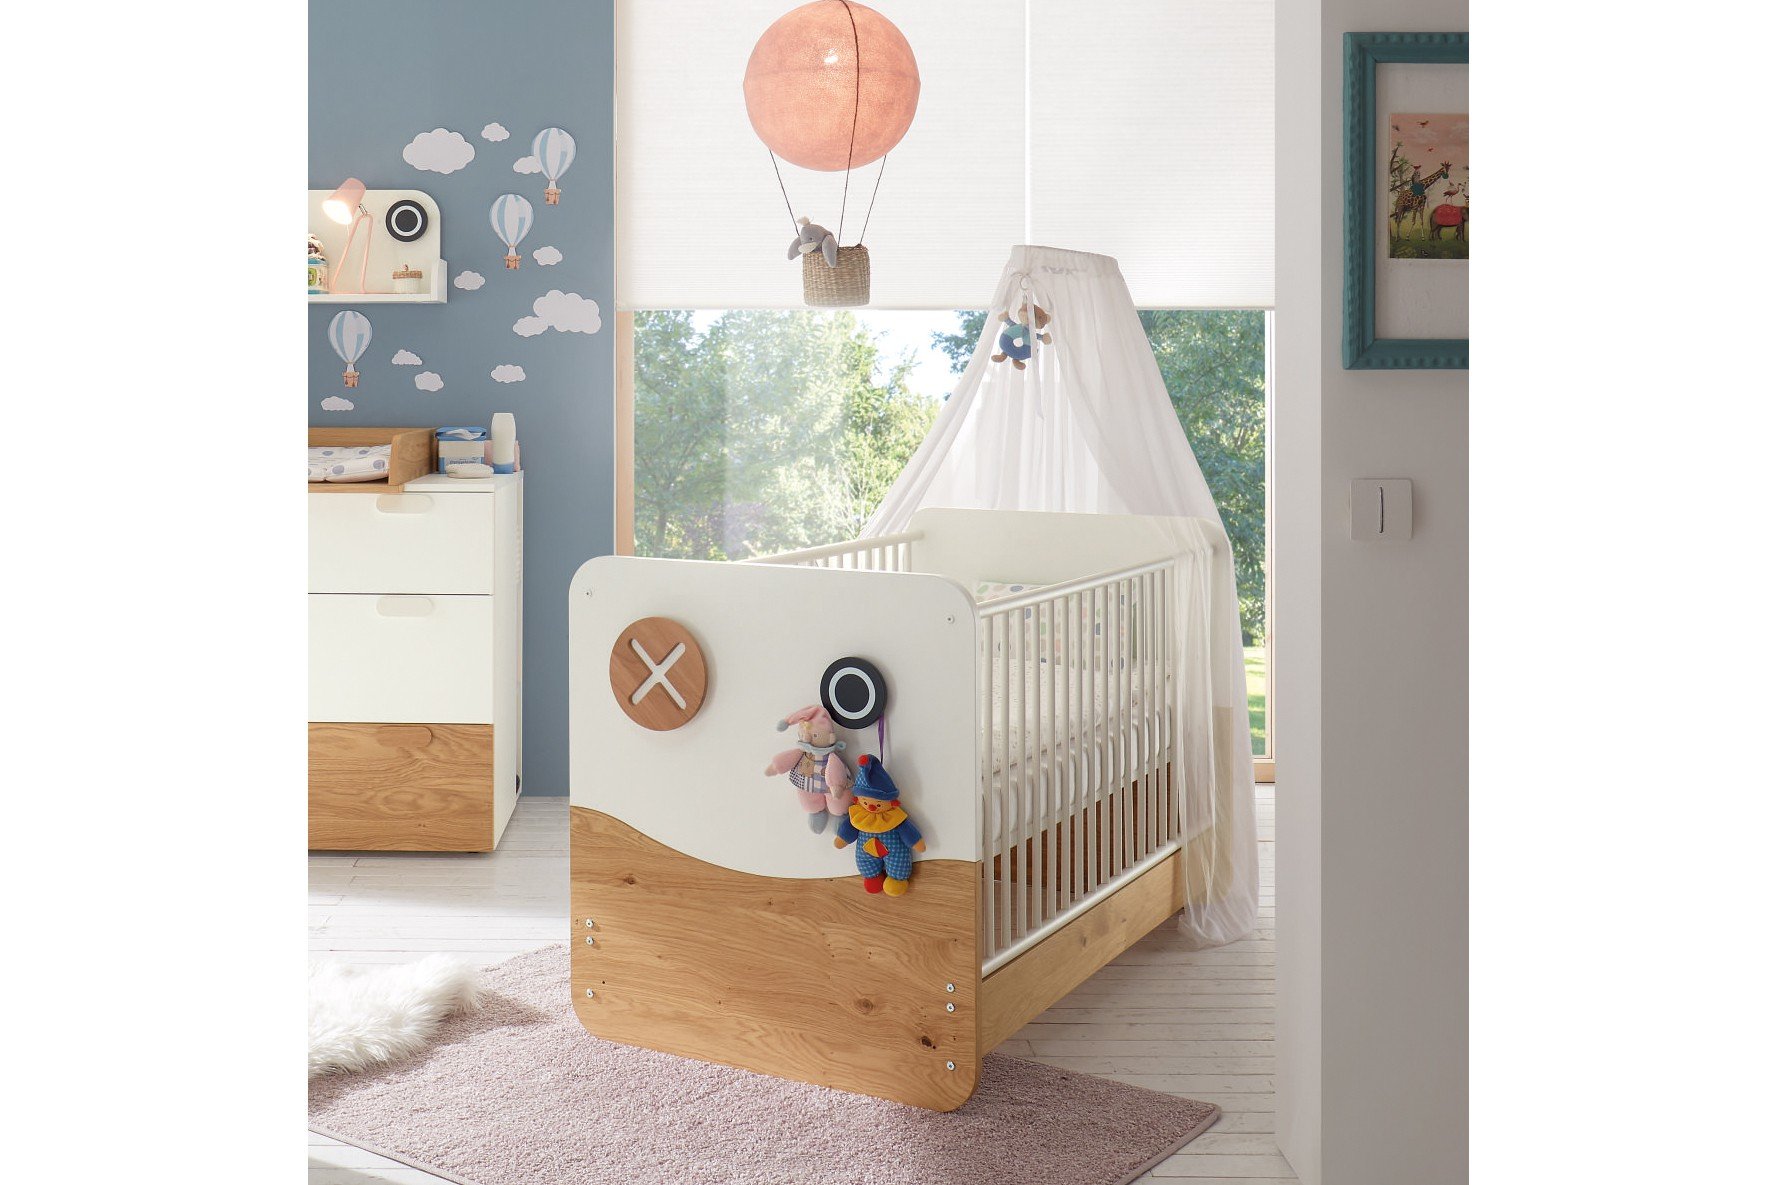 MINIMO - Baby bed  hülsta - Design furniture Made in Germany.